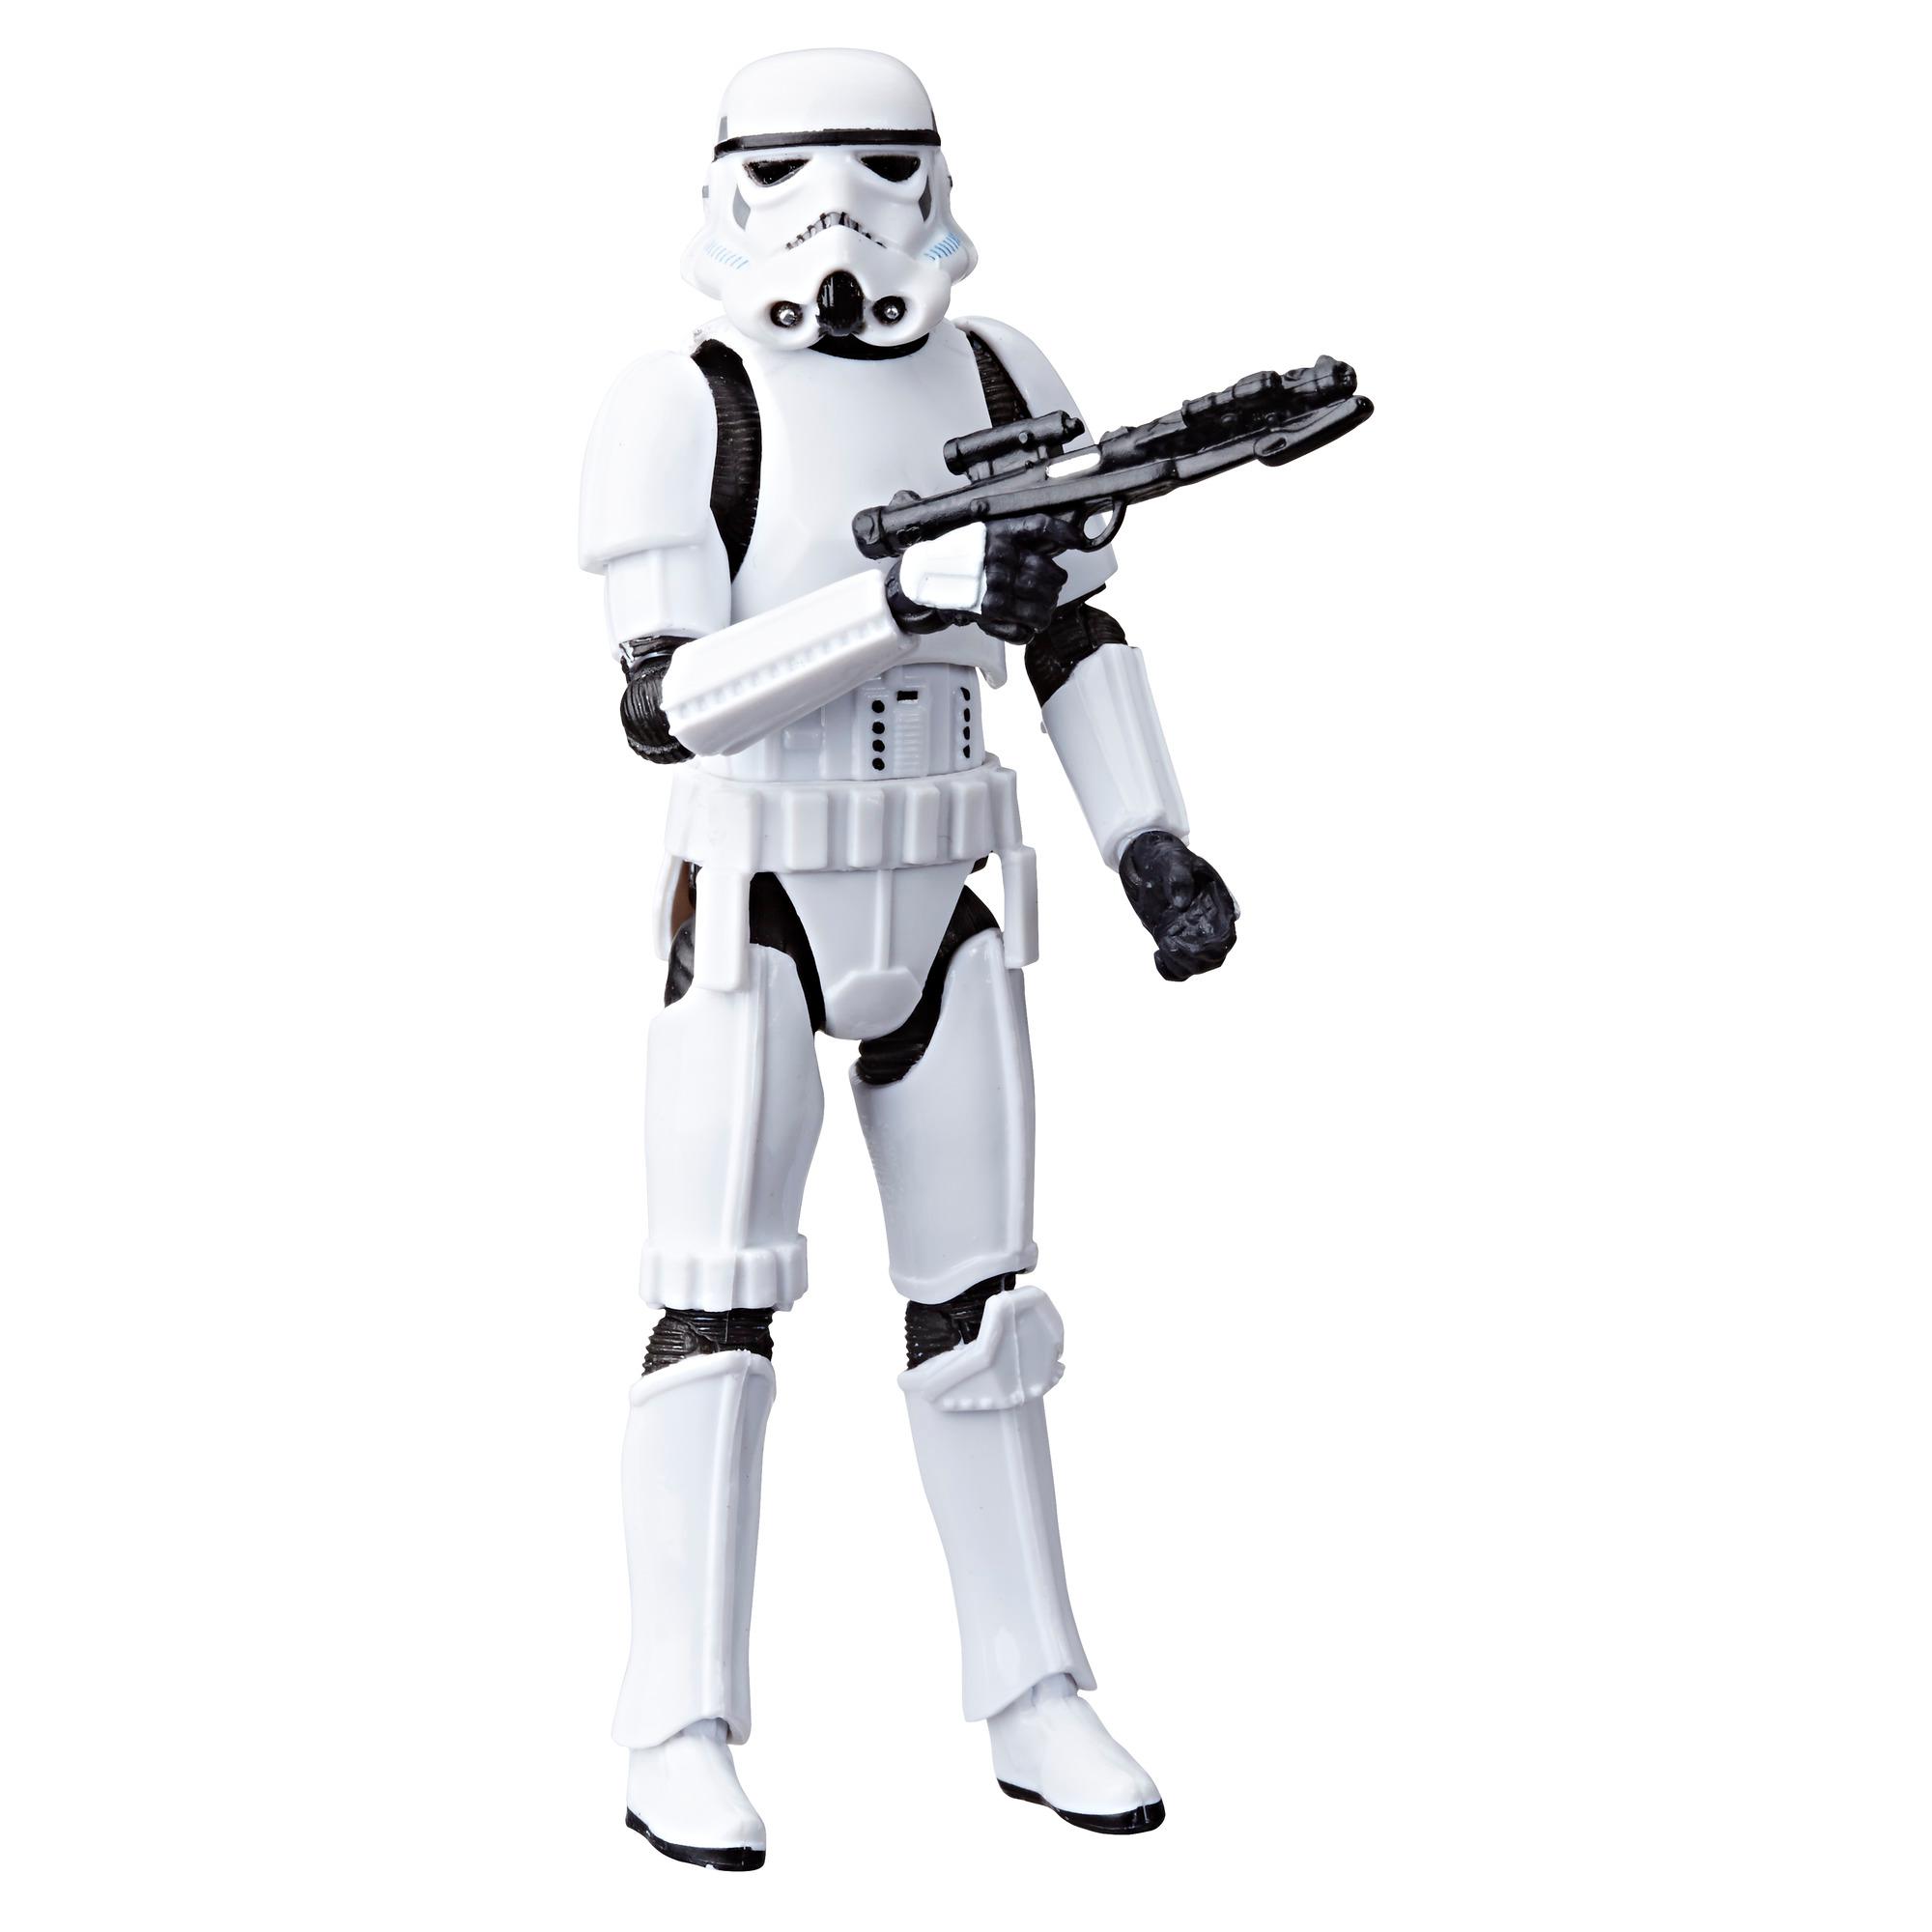 Star Wars Rogue One Imperial Stormtrooper Action Figure Hasbro 2016 for sale online 